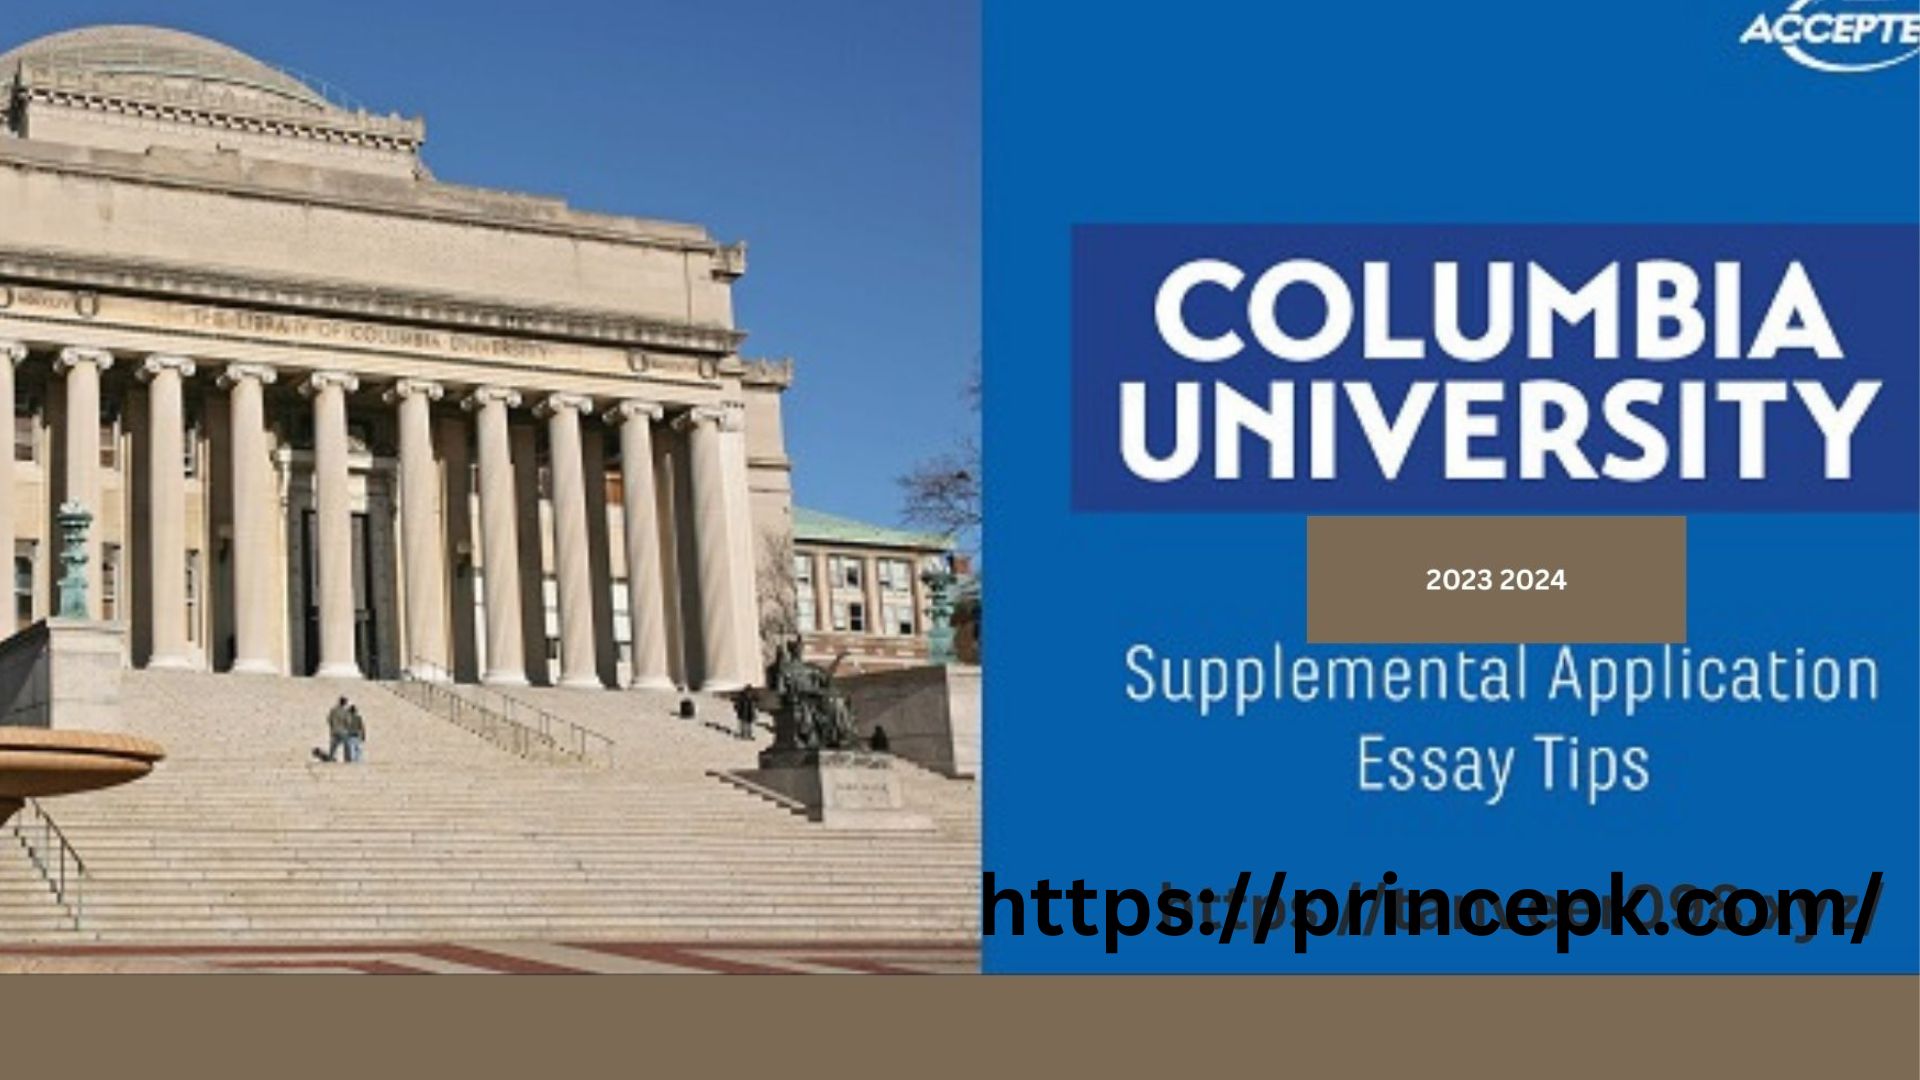 Instructions to Apply to The College of English Columbia